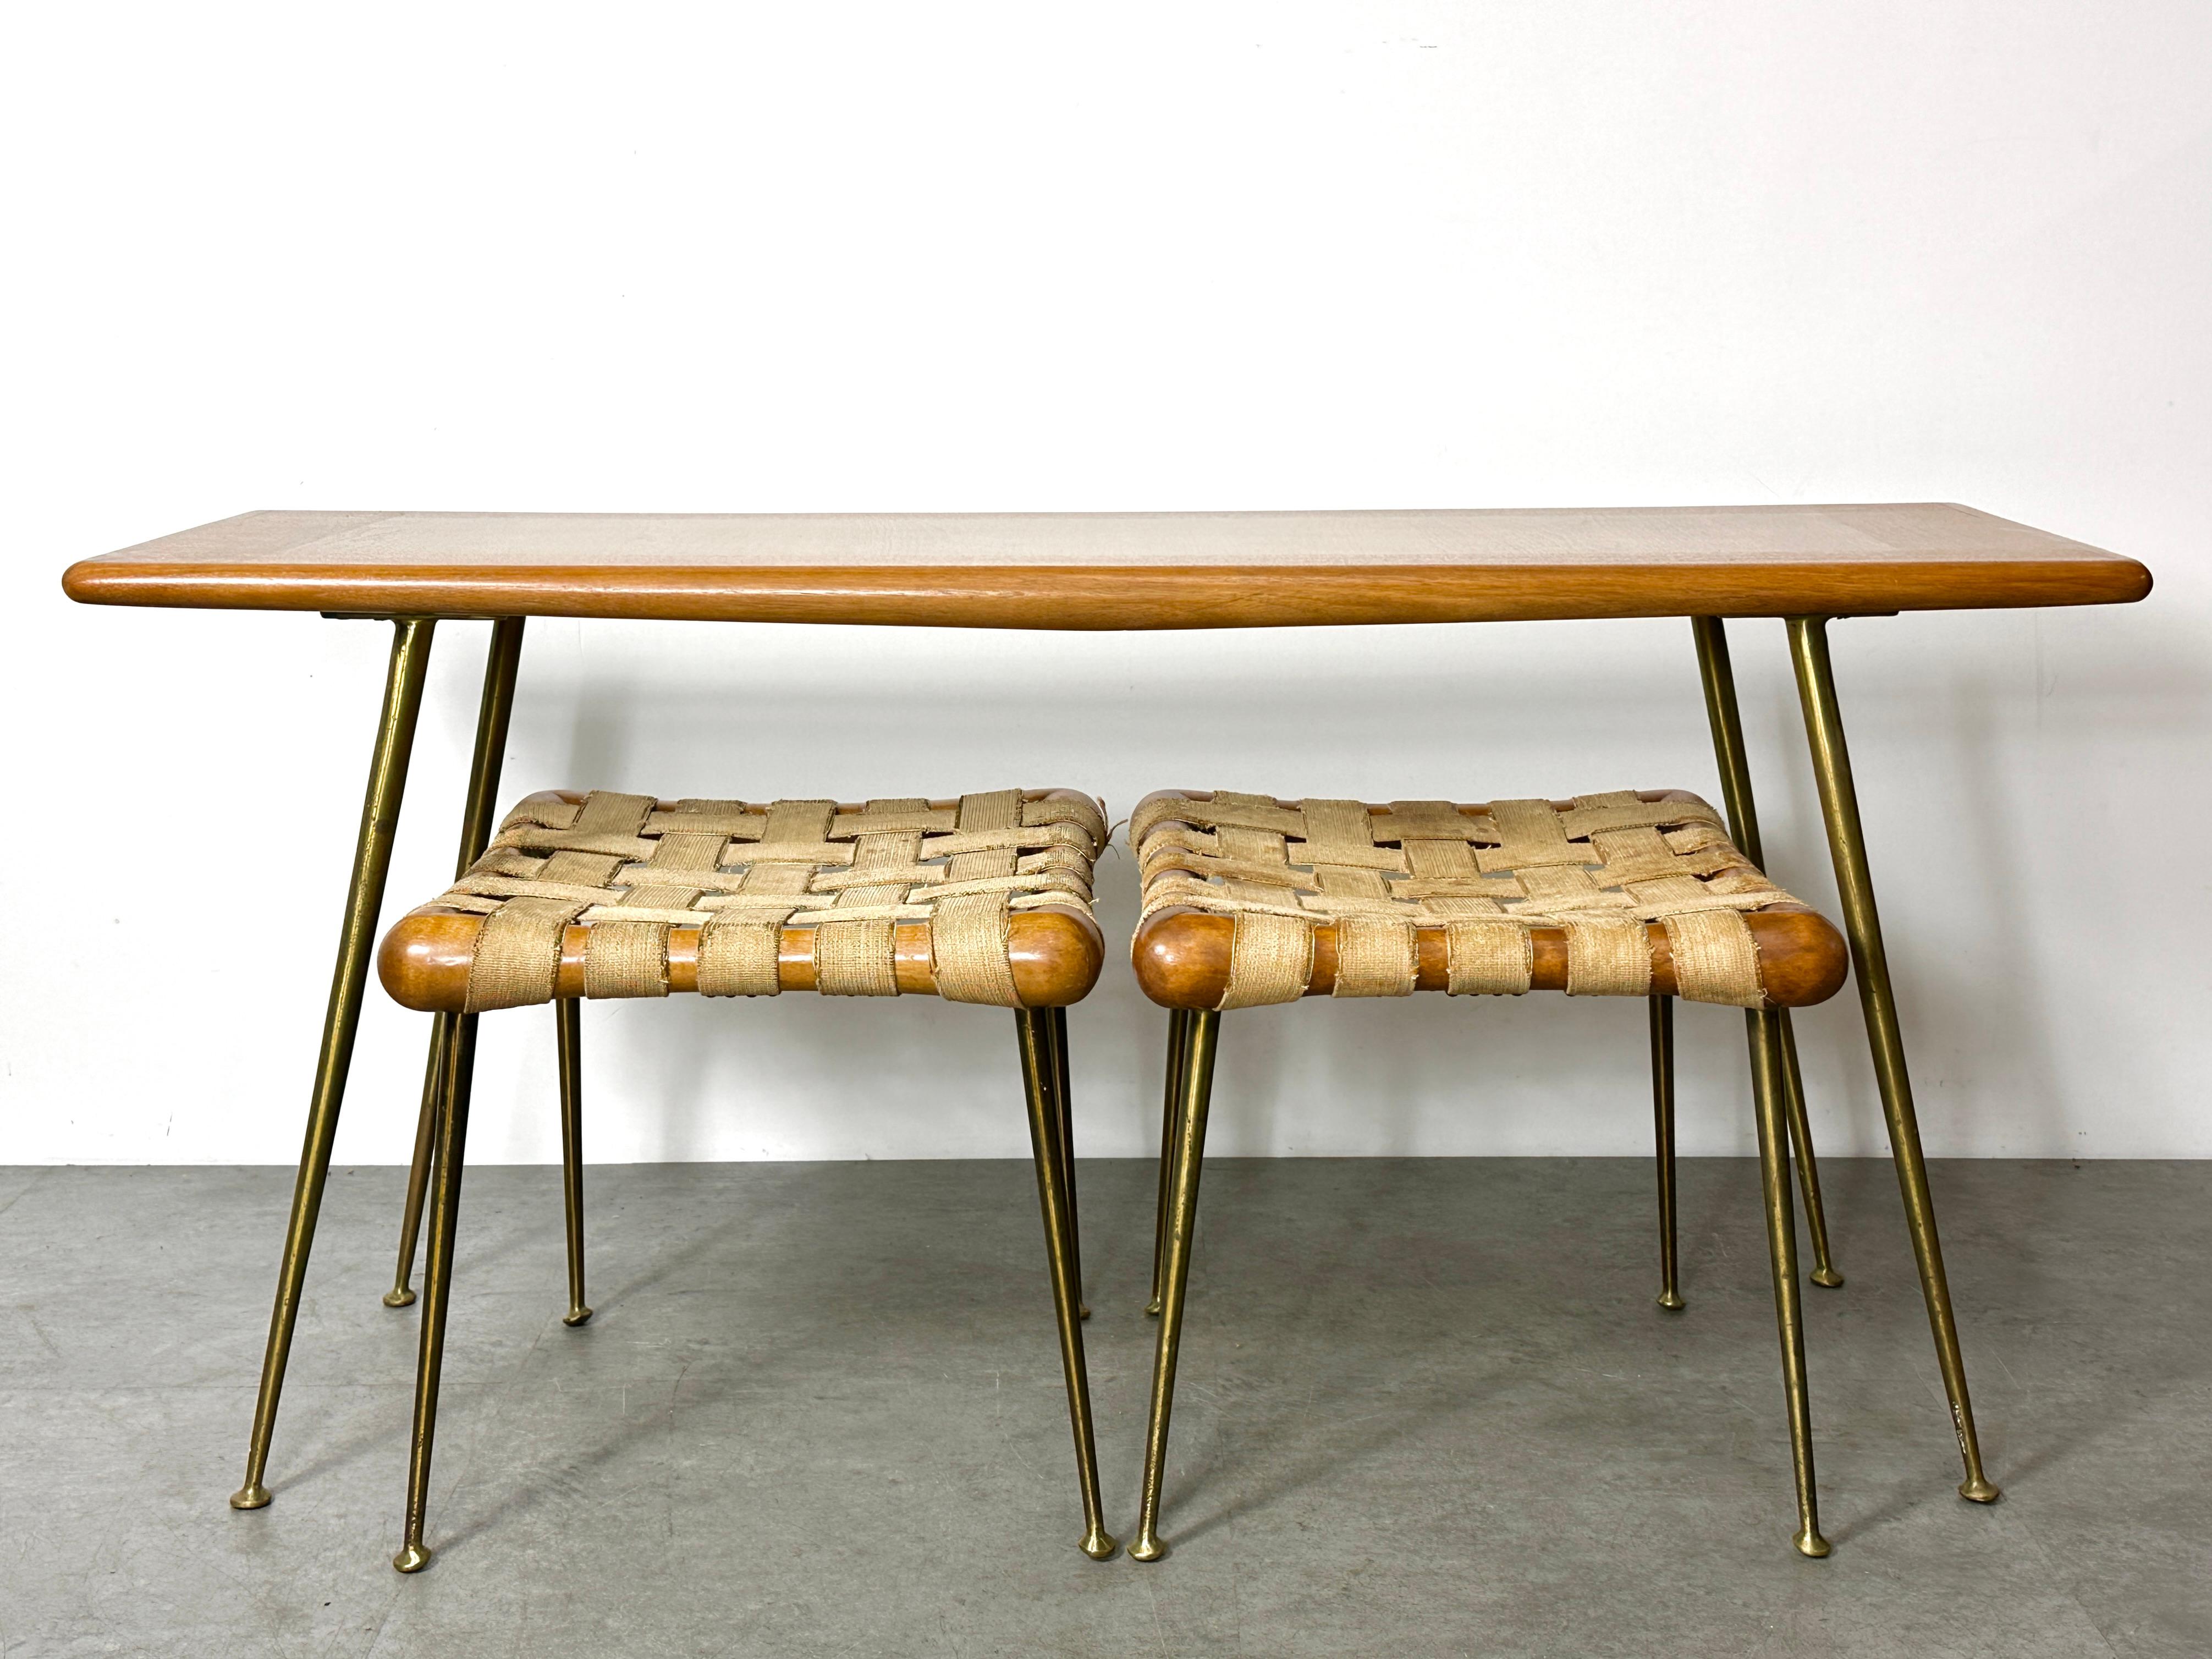 A rare grouping by Terence Herold Robsjohn Gibbings for Widdicomb

Solid brass model 1787 splayed leg console table with complimenting pair of nested model 1730 webbed stools

circa 1953
Original markings to console and fabric tags to